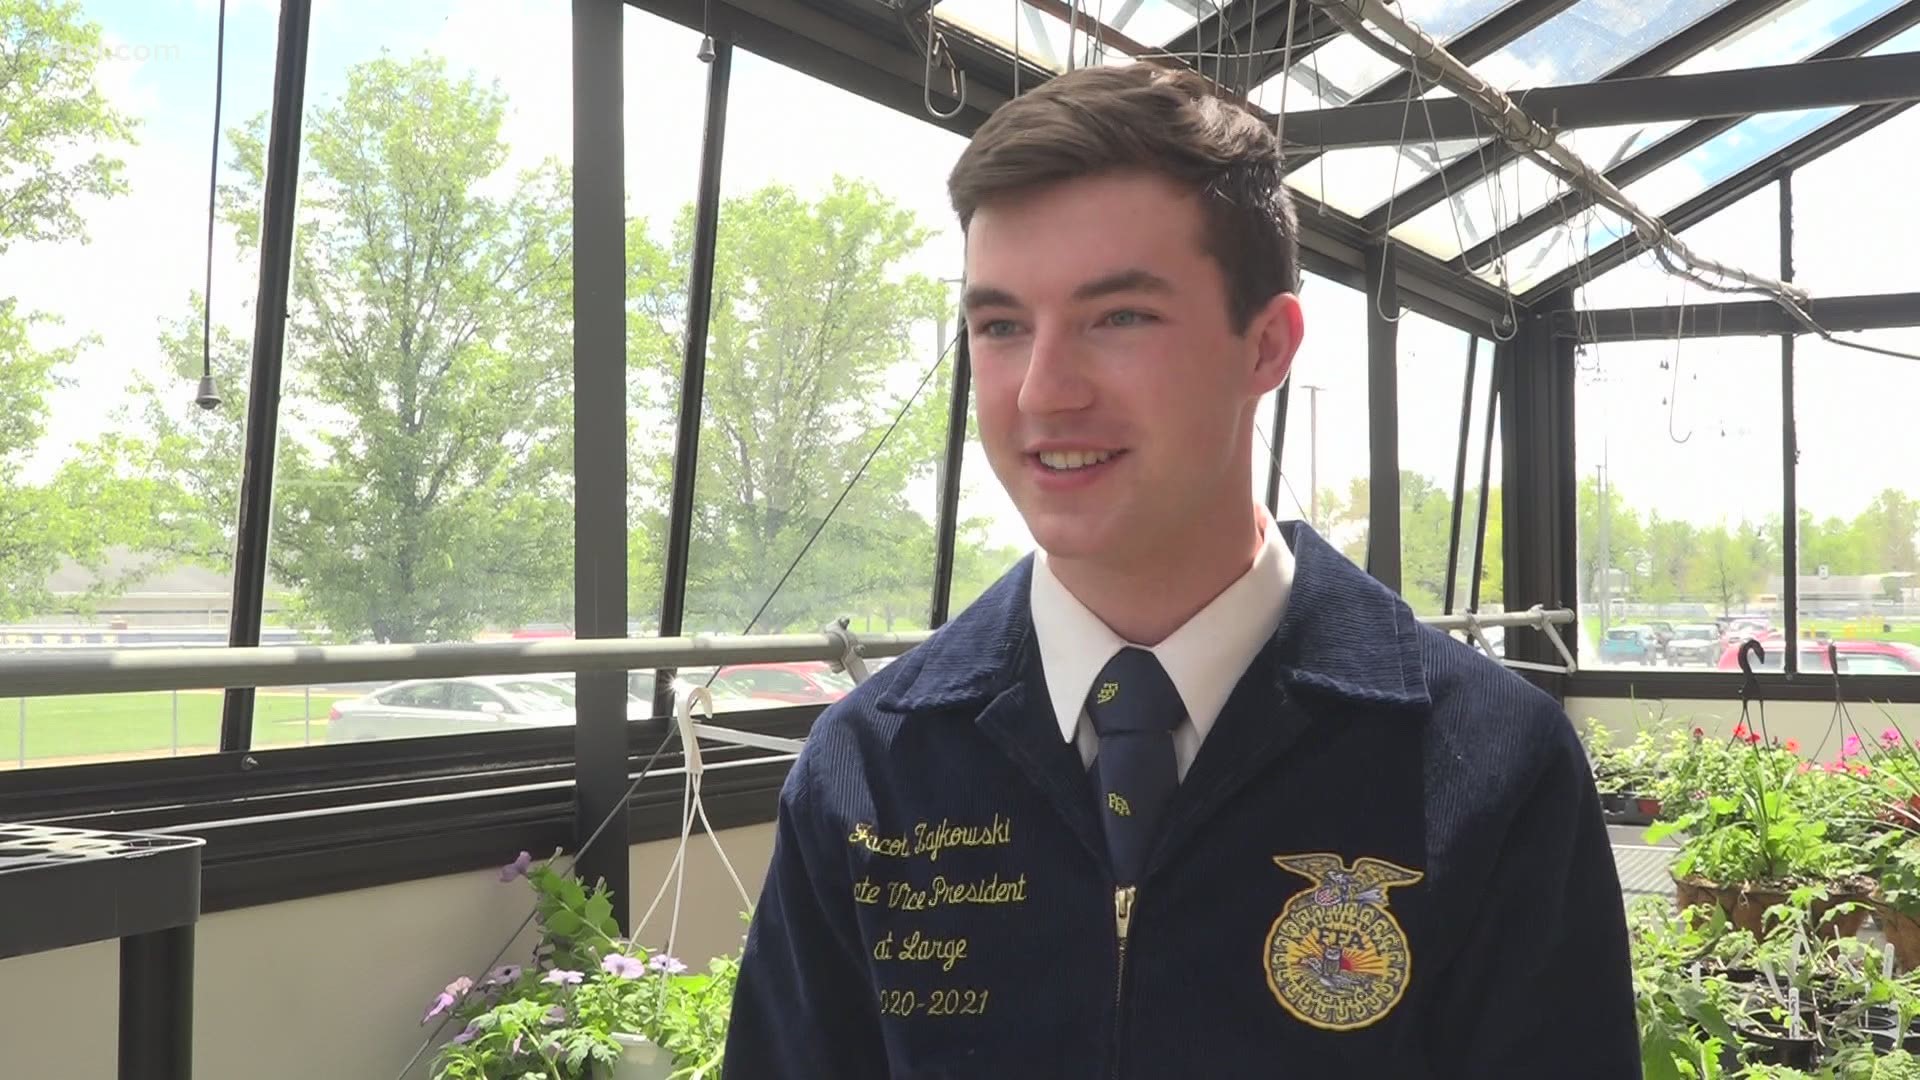 Jacob Zajkowski is ready to lead other young farmers and make a name for himself in the farming and agriculture community.